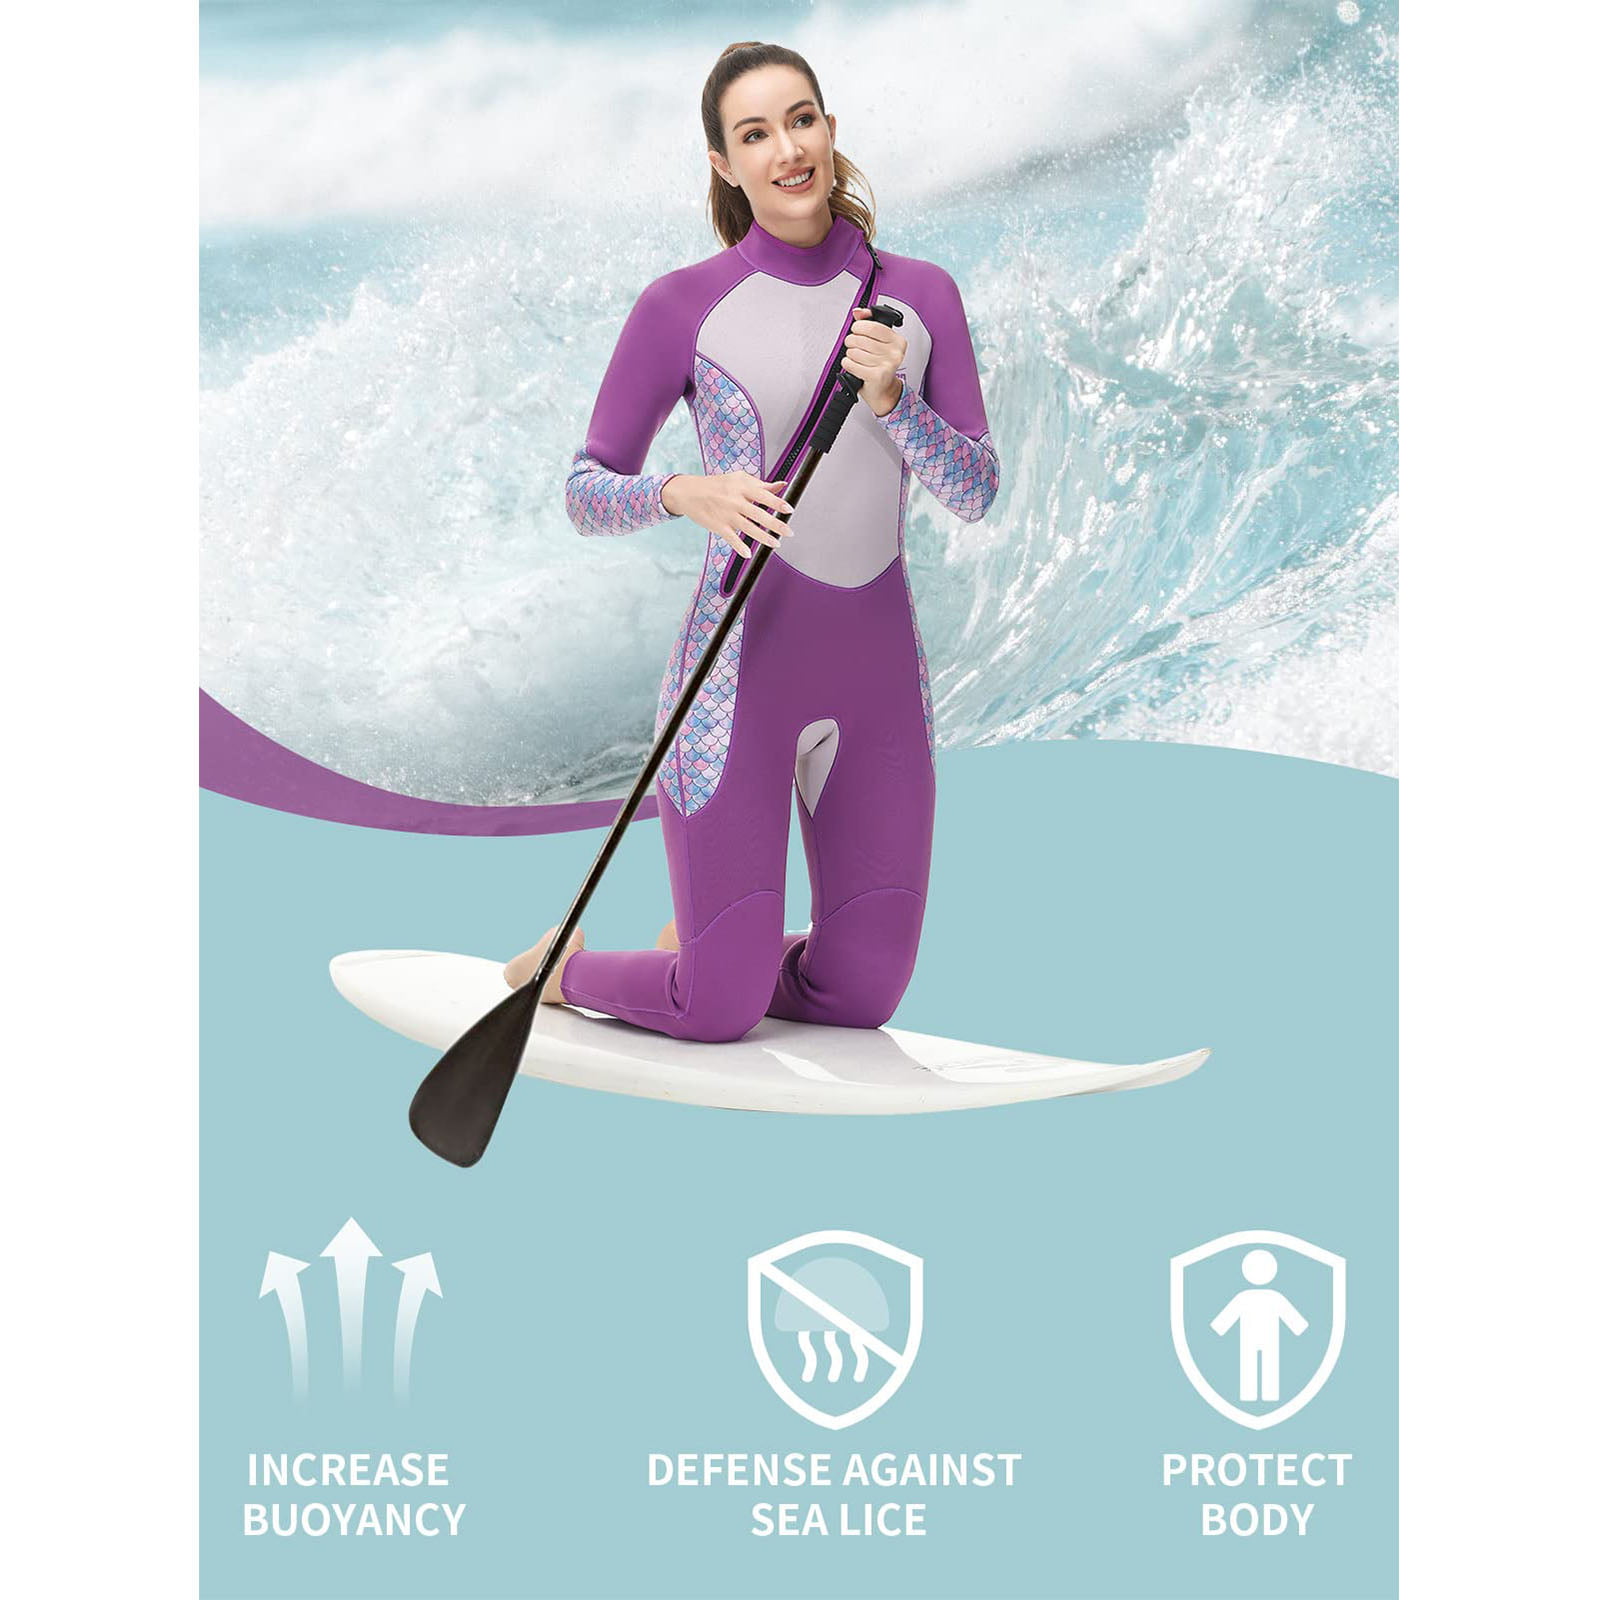 Owntop Women Wetsuit 3mm Neoprene Surfing Wet Suit Full Keep Warm Front Zip  Diving Suits Body Protection for Diving Surfing Snorkeling Kayaking